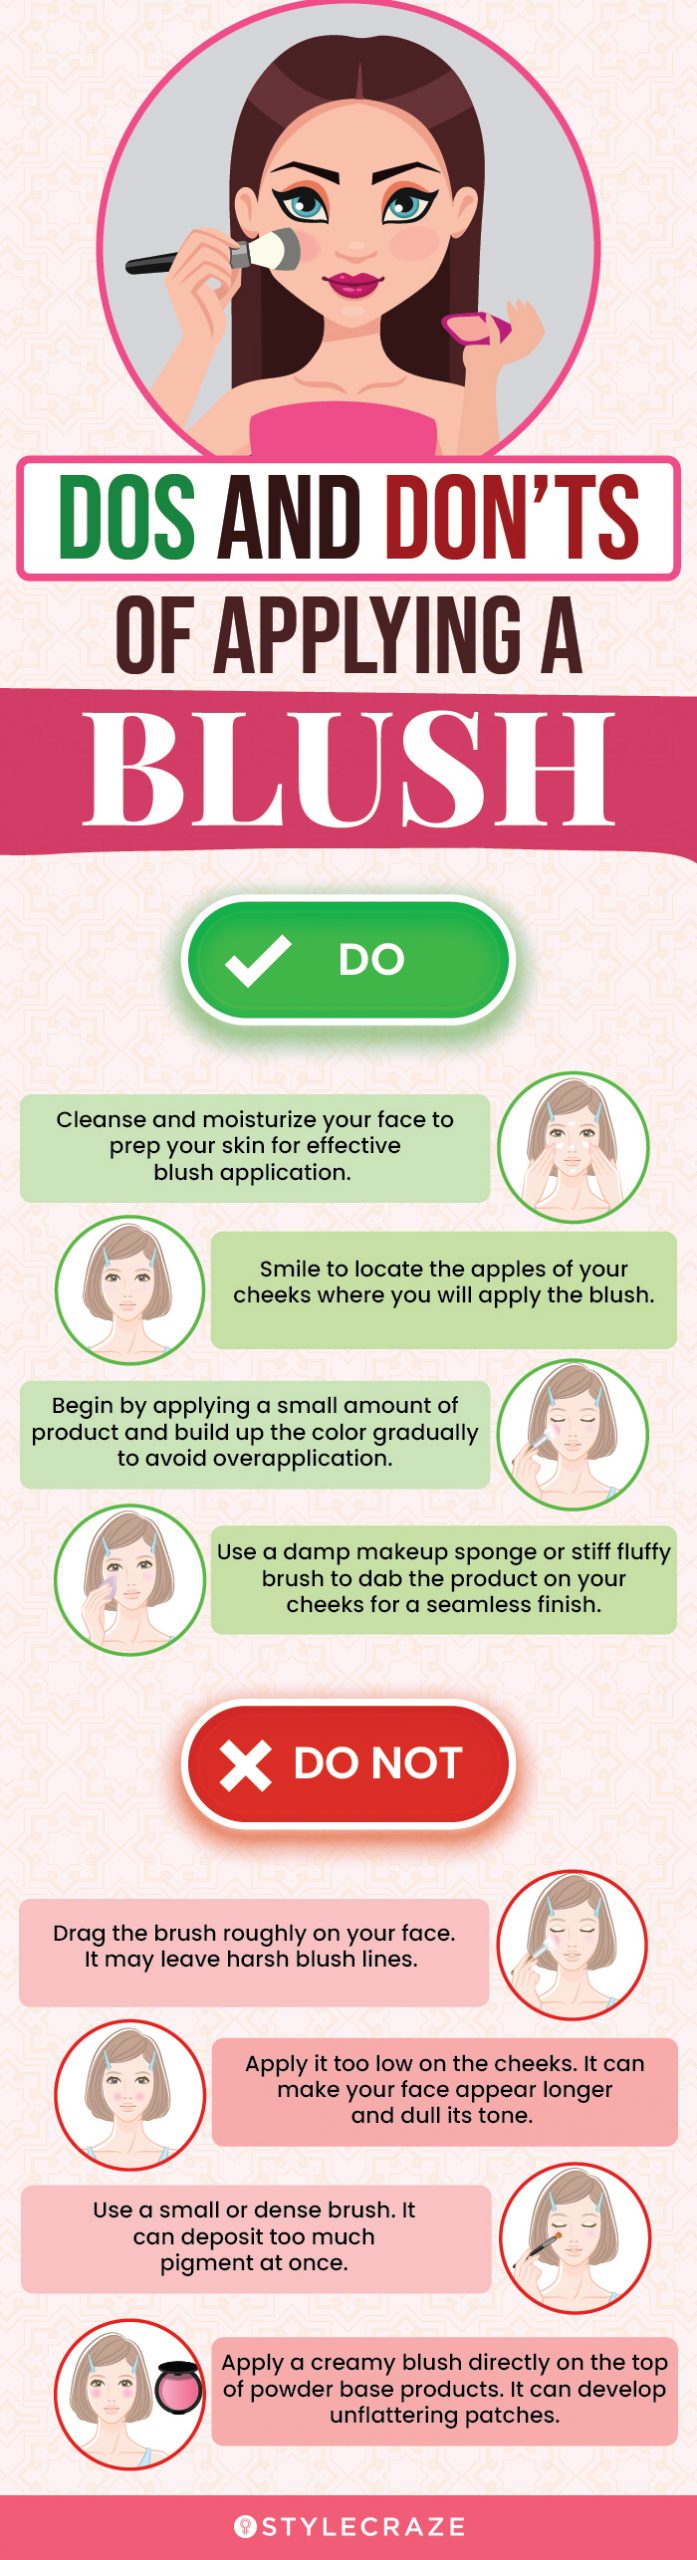 Dos And Don’ts Of Applying A Blush (infographic)